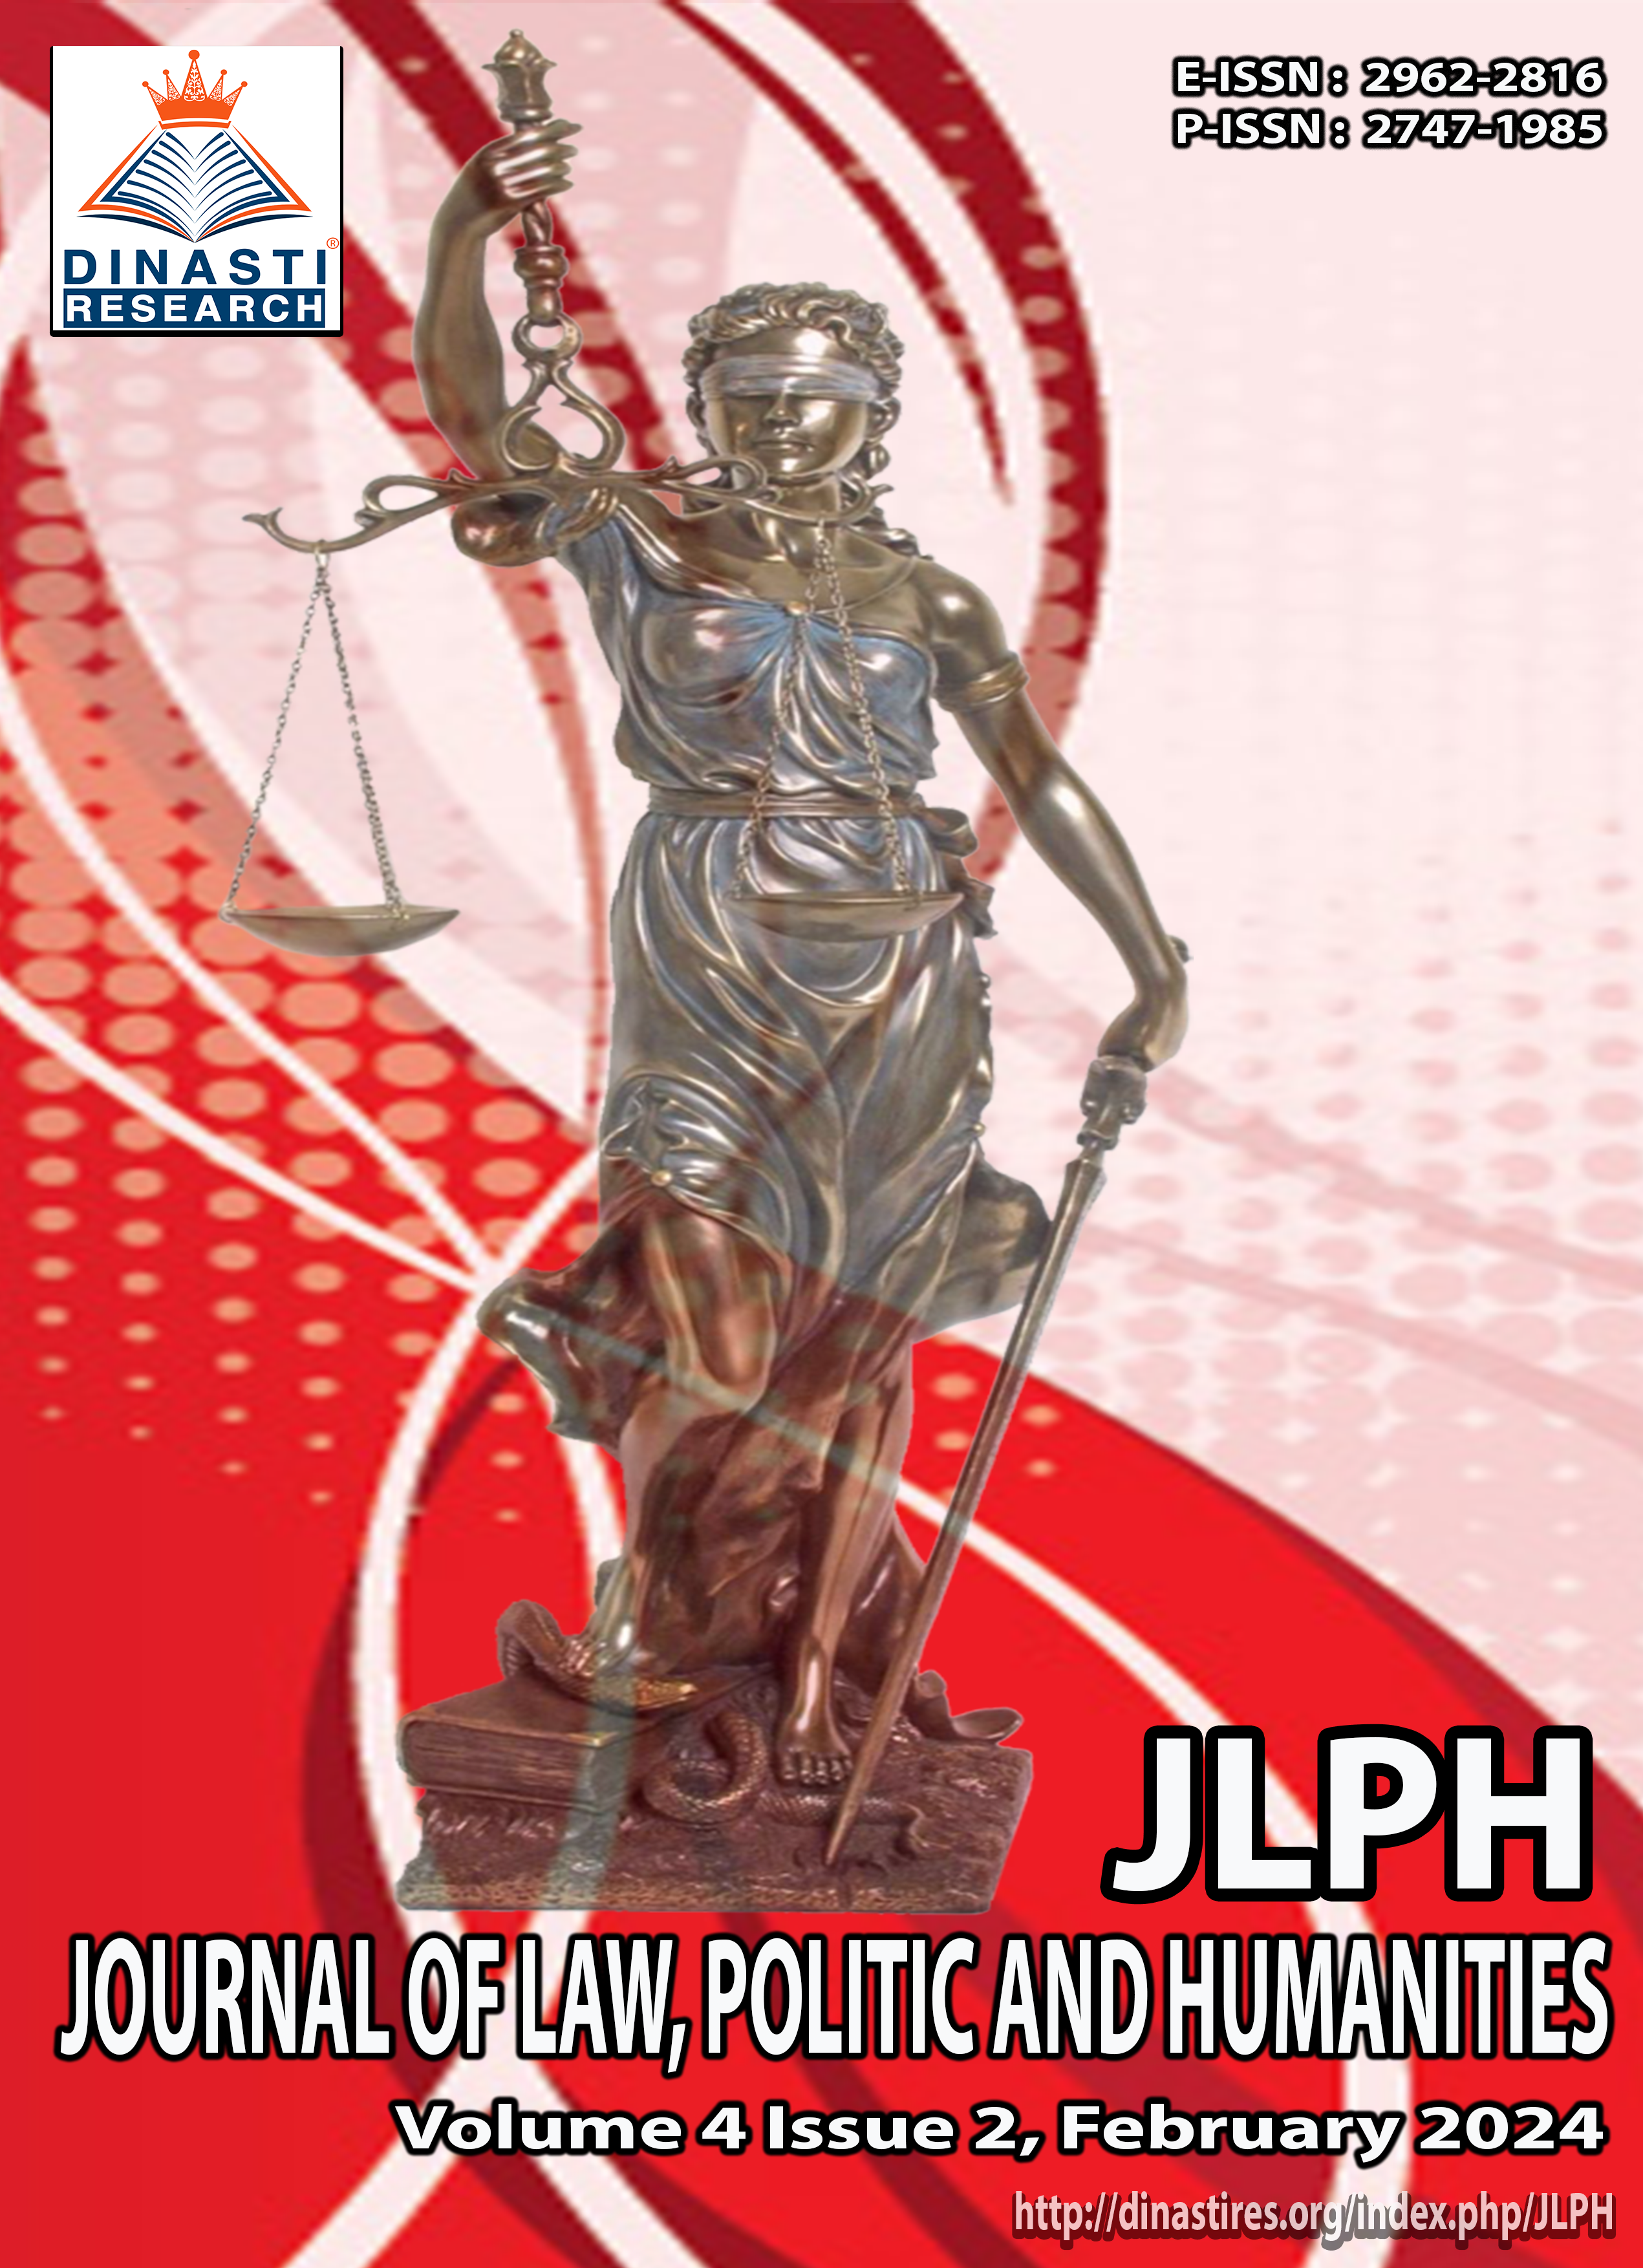 					View Vol. 4 No. 2 (2024): (JLPH) Journal of Law, Politic and Humanities (January - February 2024)
				